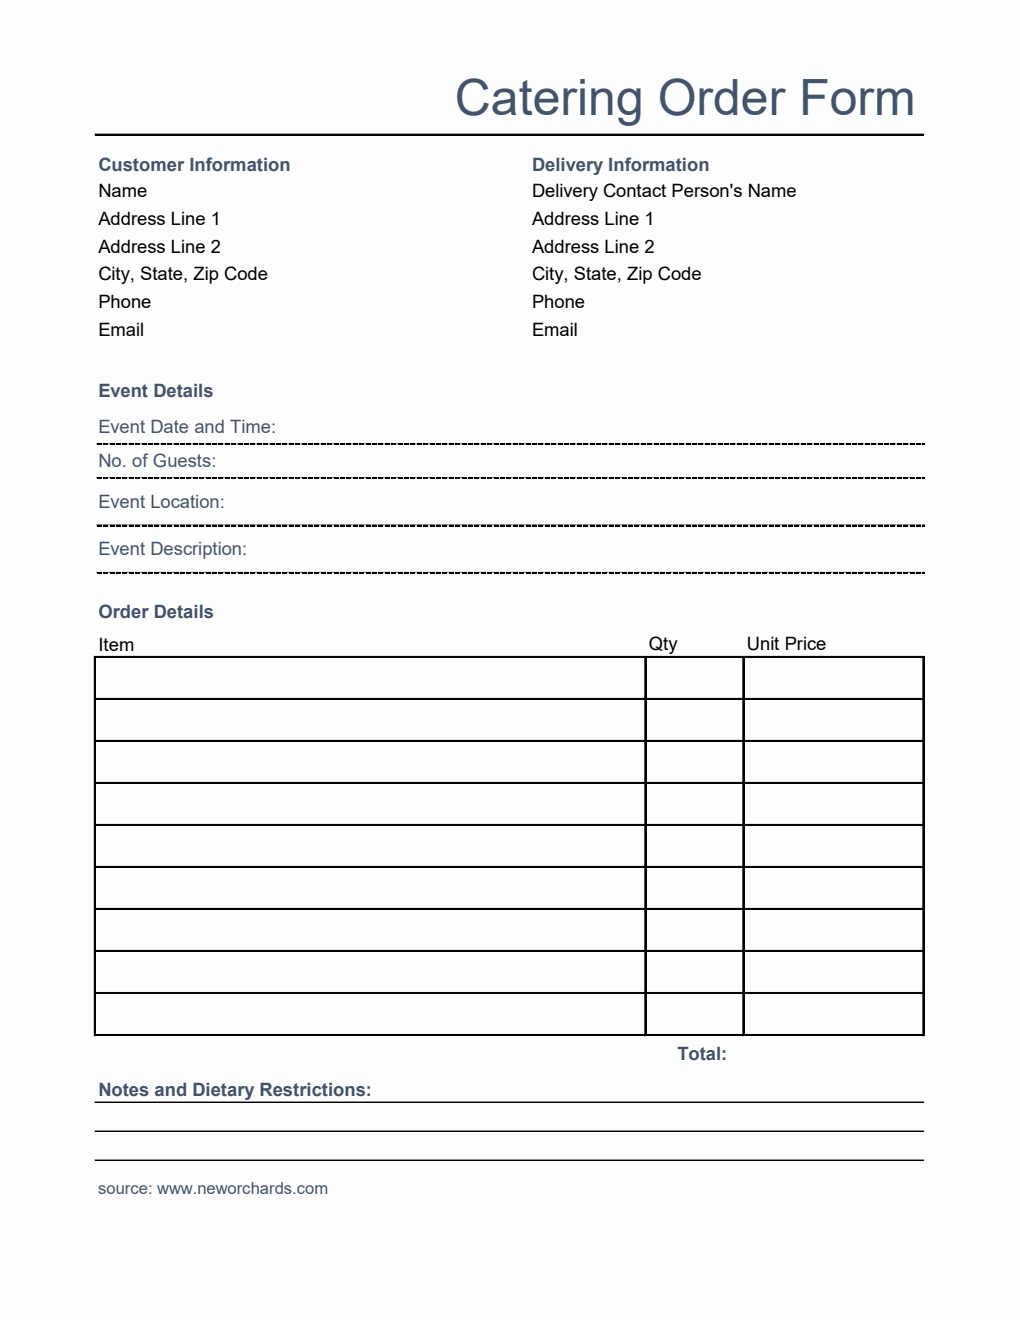 Blank Catering Order Form Template in Excel